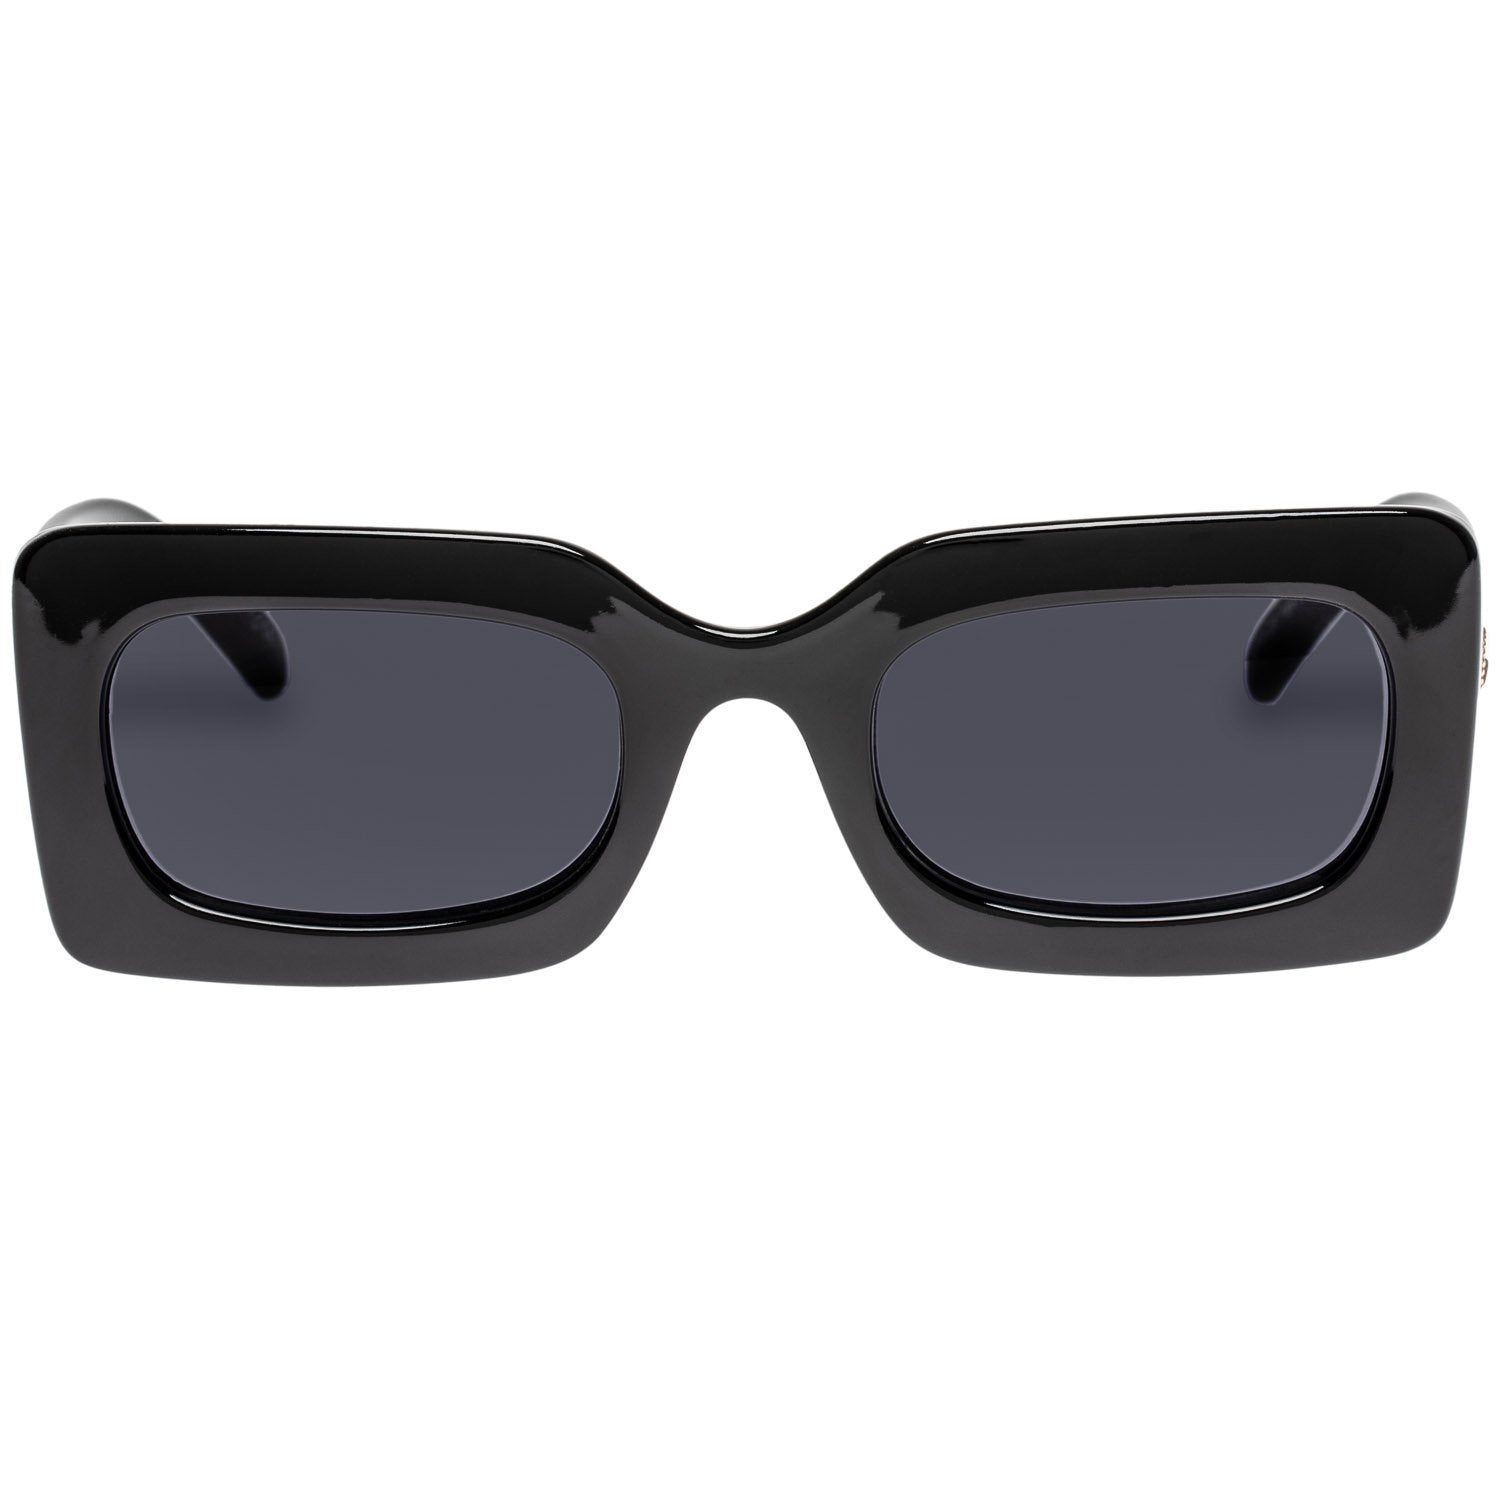 OOO Polycarbonate Sunglasses For Men And Women Classic Style With